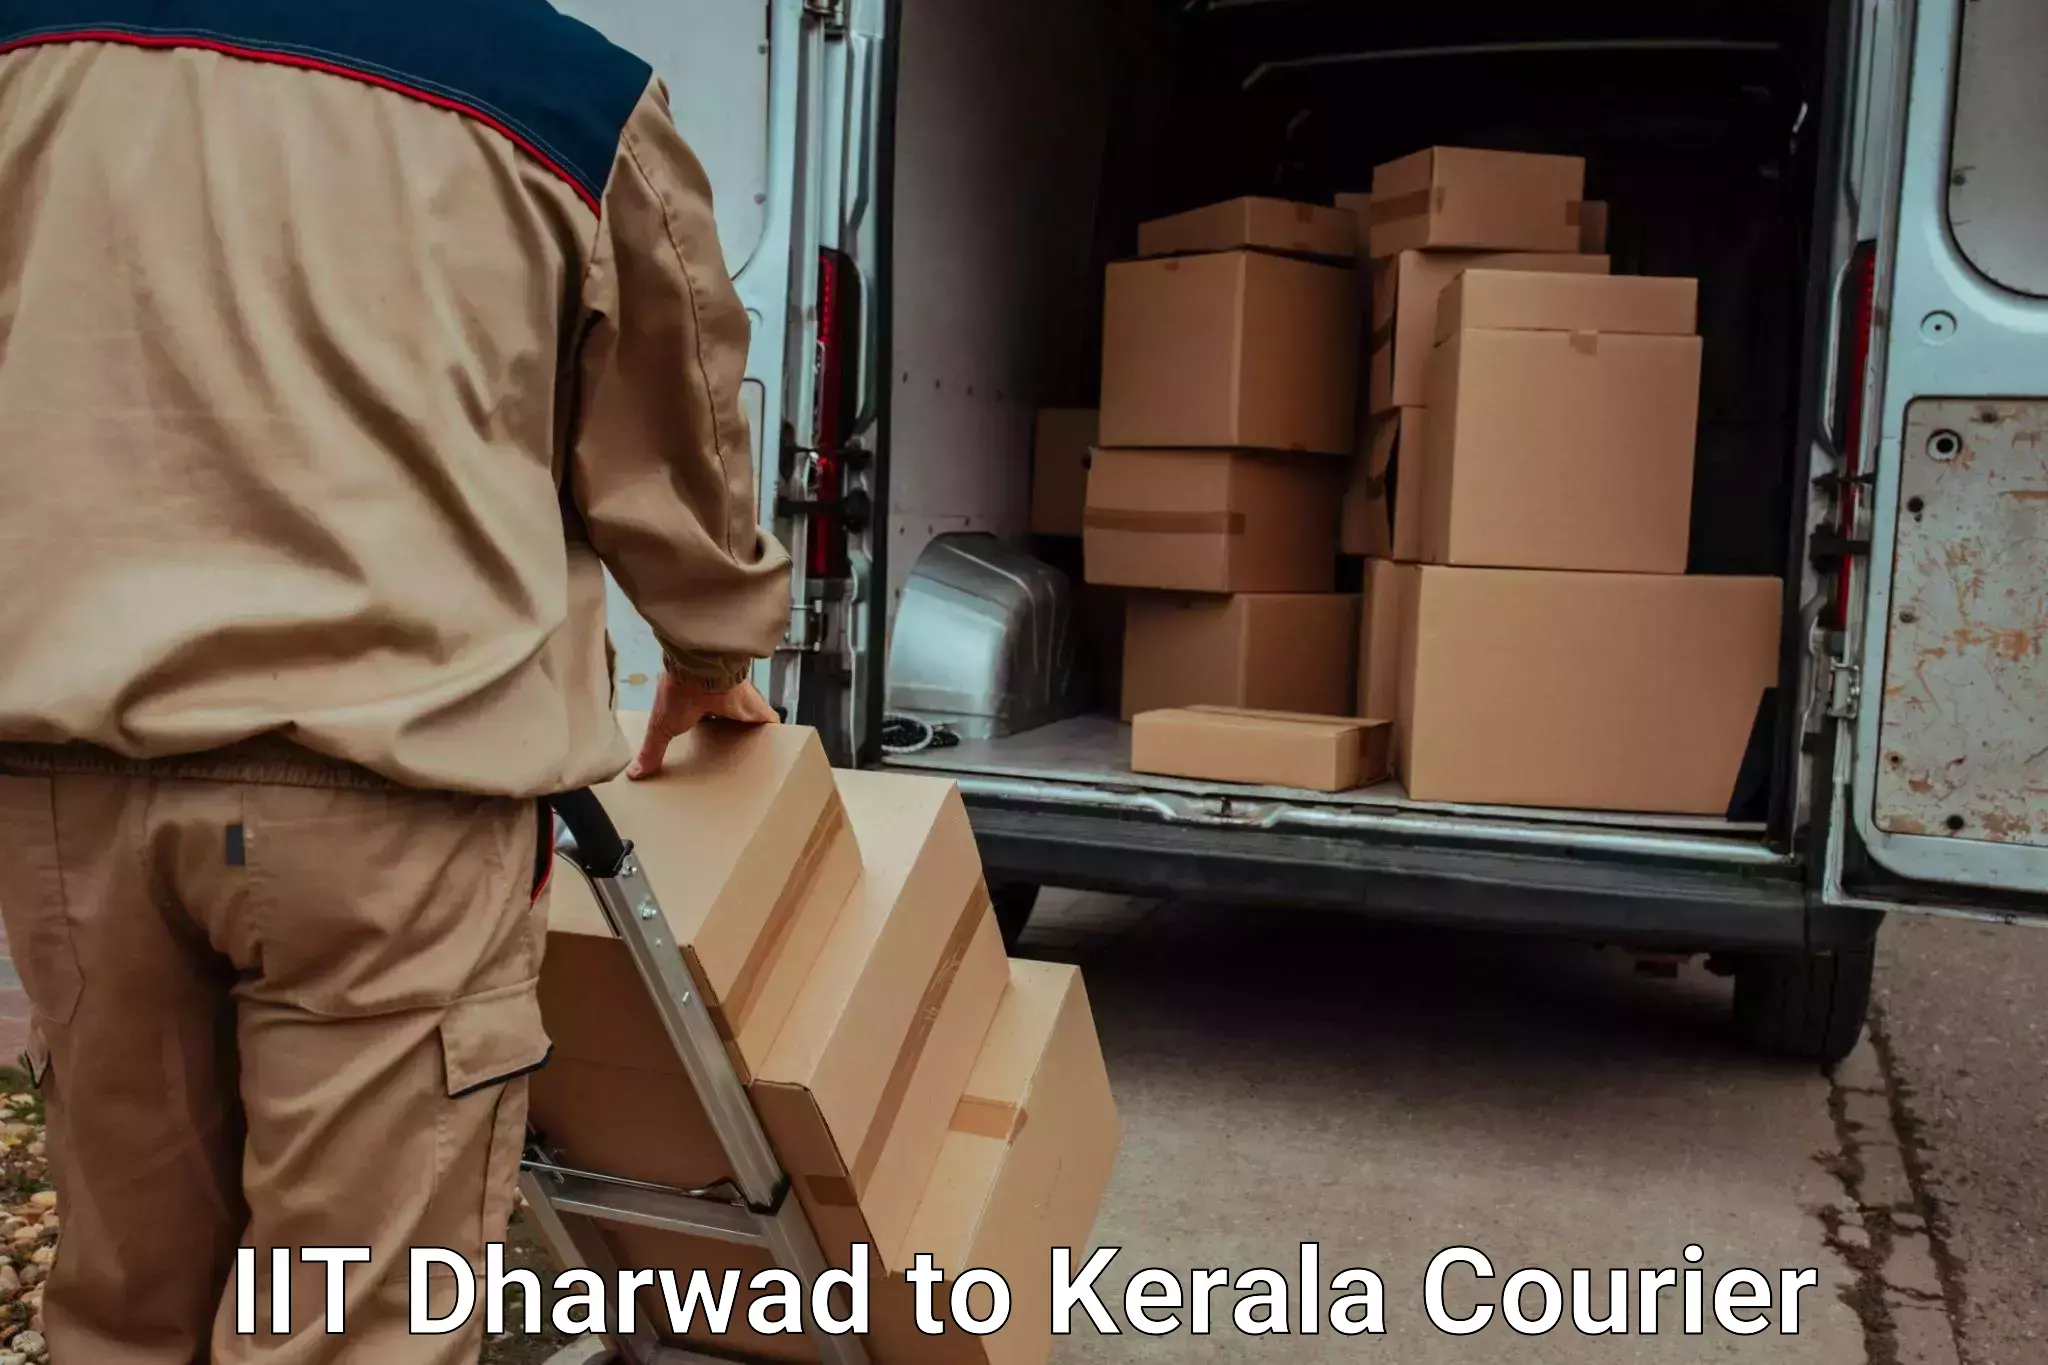 Quality relocation assistance IIT Dharwad to Kuchi